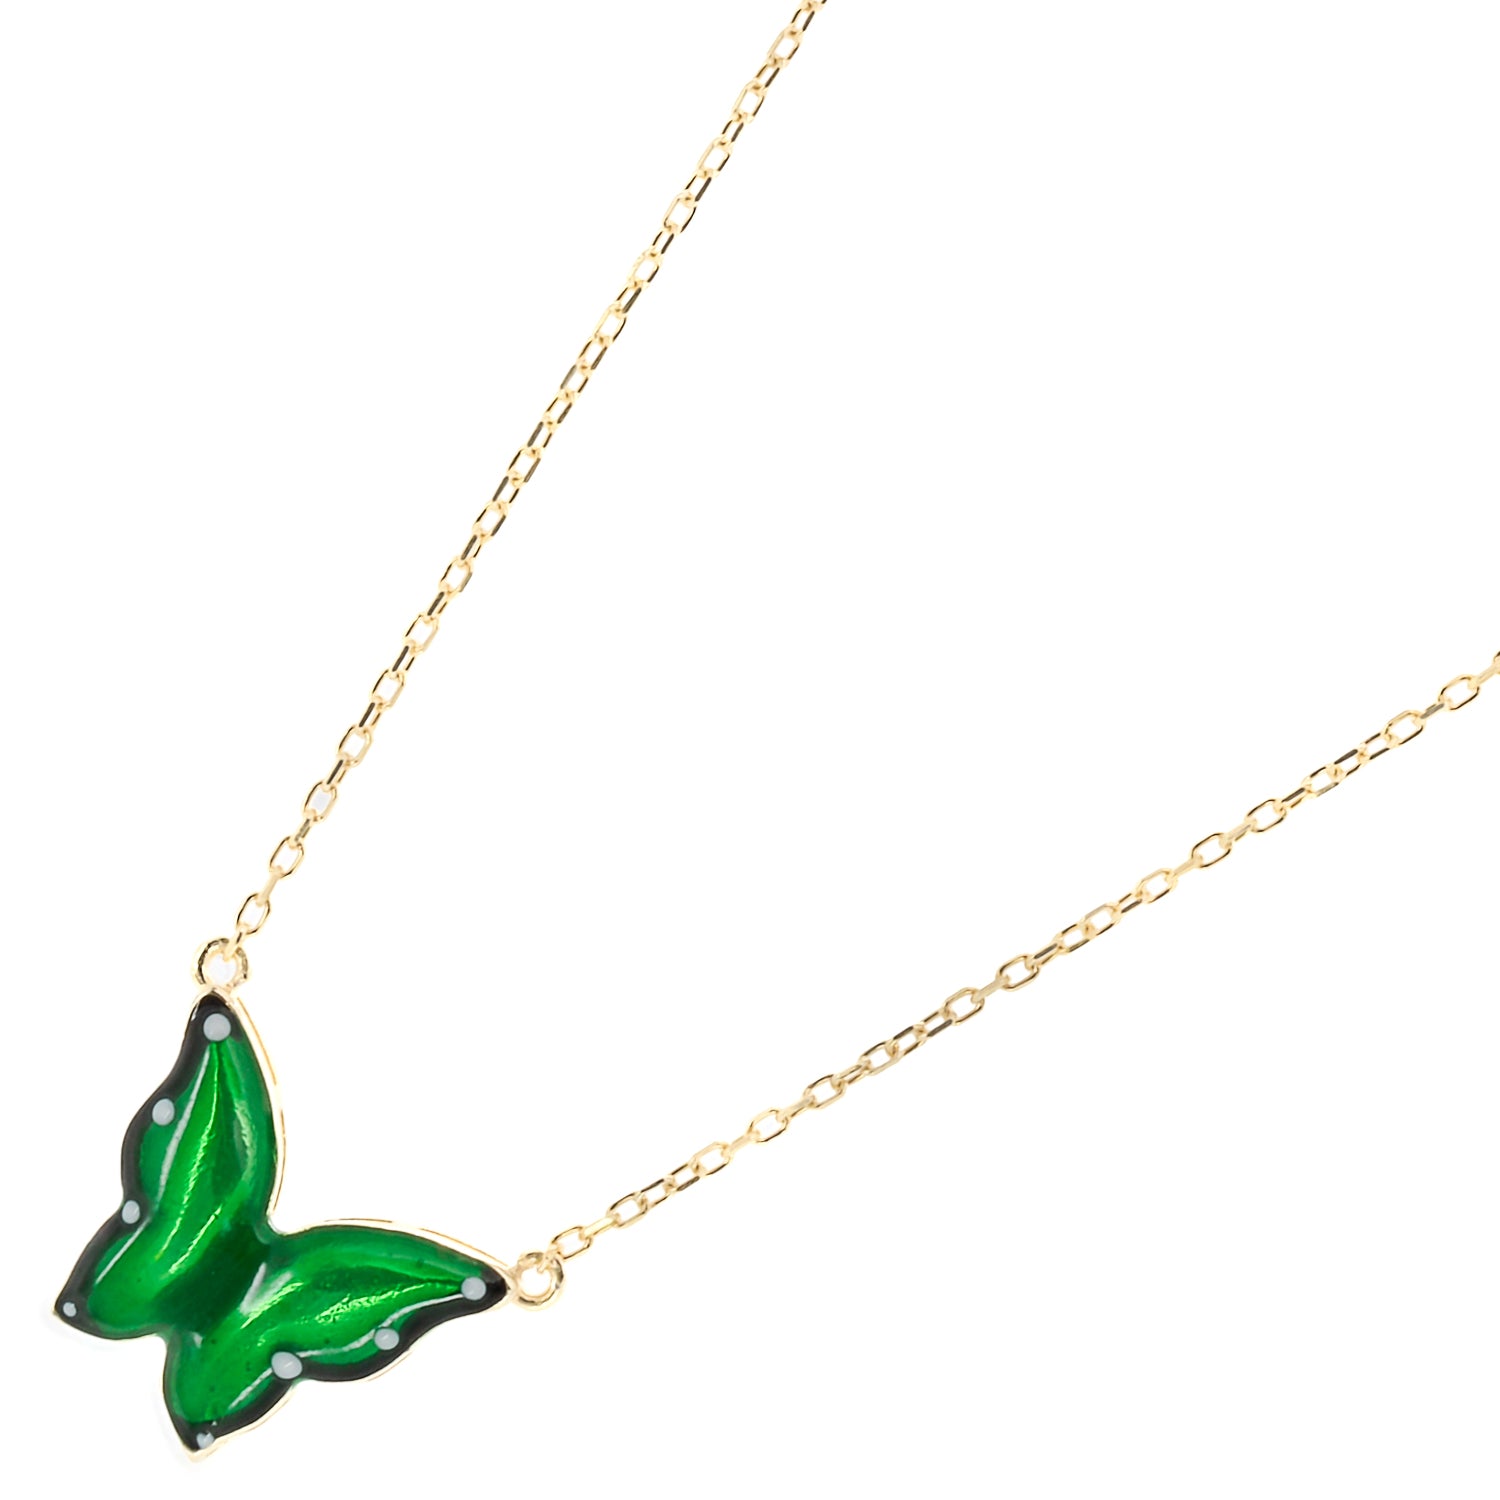 Stylish shot of the Gold Abundance Green Enamel Butterfly Necklace, adding a touch of spirituality and elegance to any outfit.